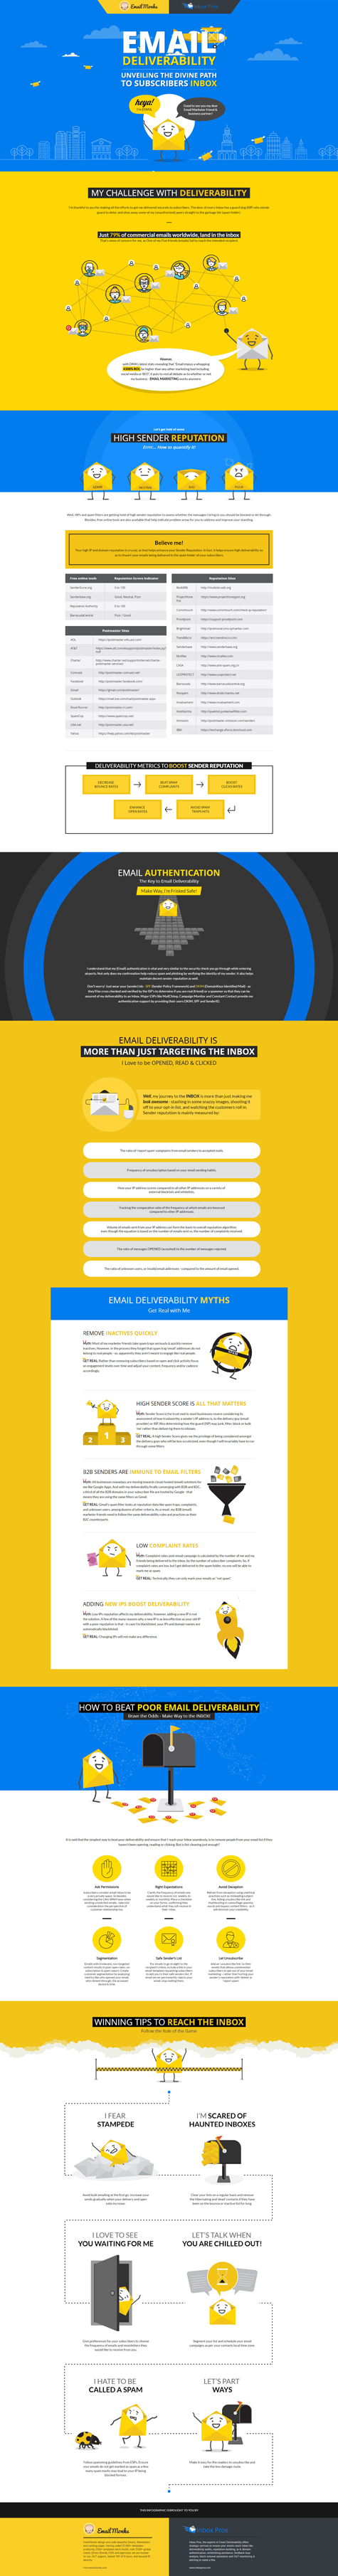 1970 475w infographic Expert Tips for Receiving Better Email Deliverability Rates